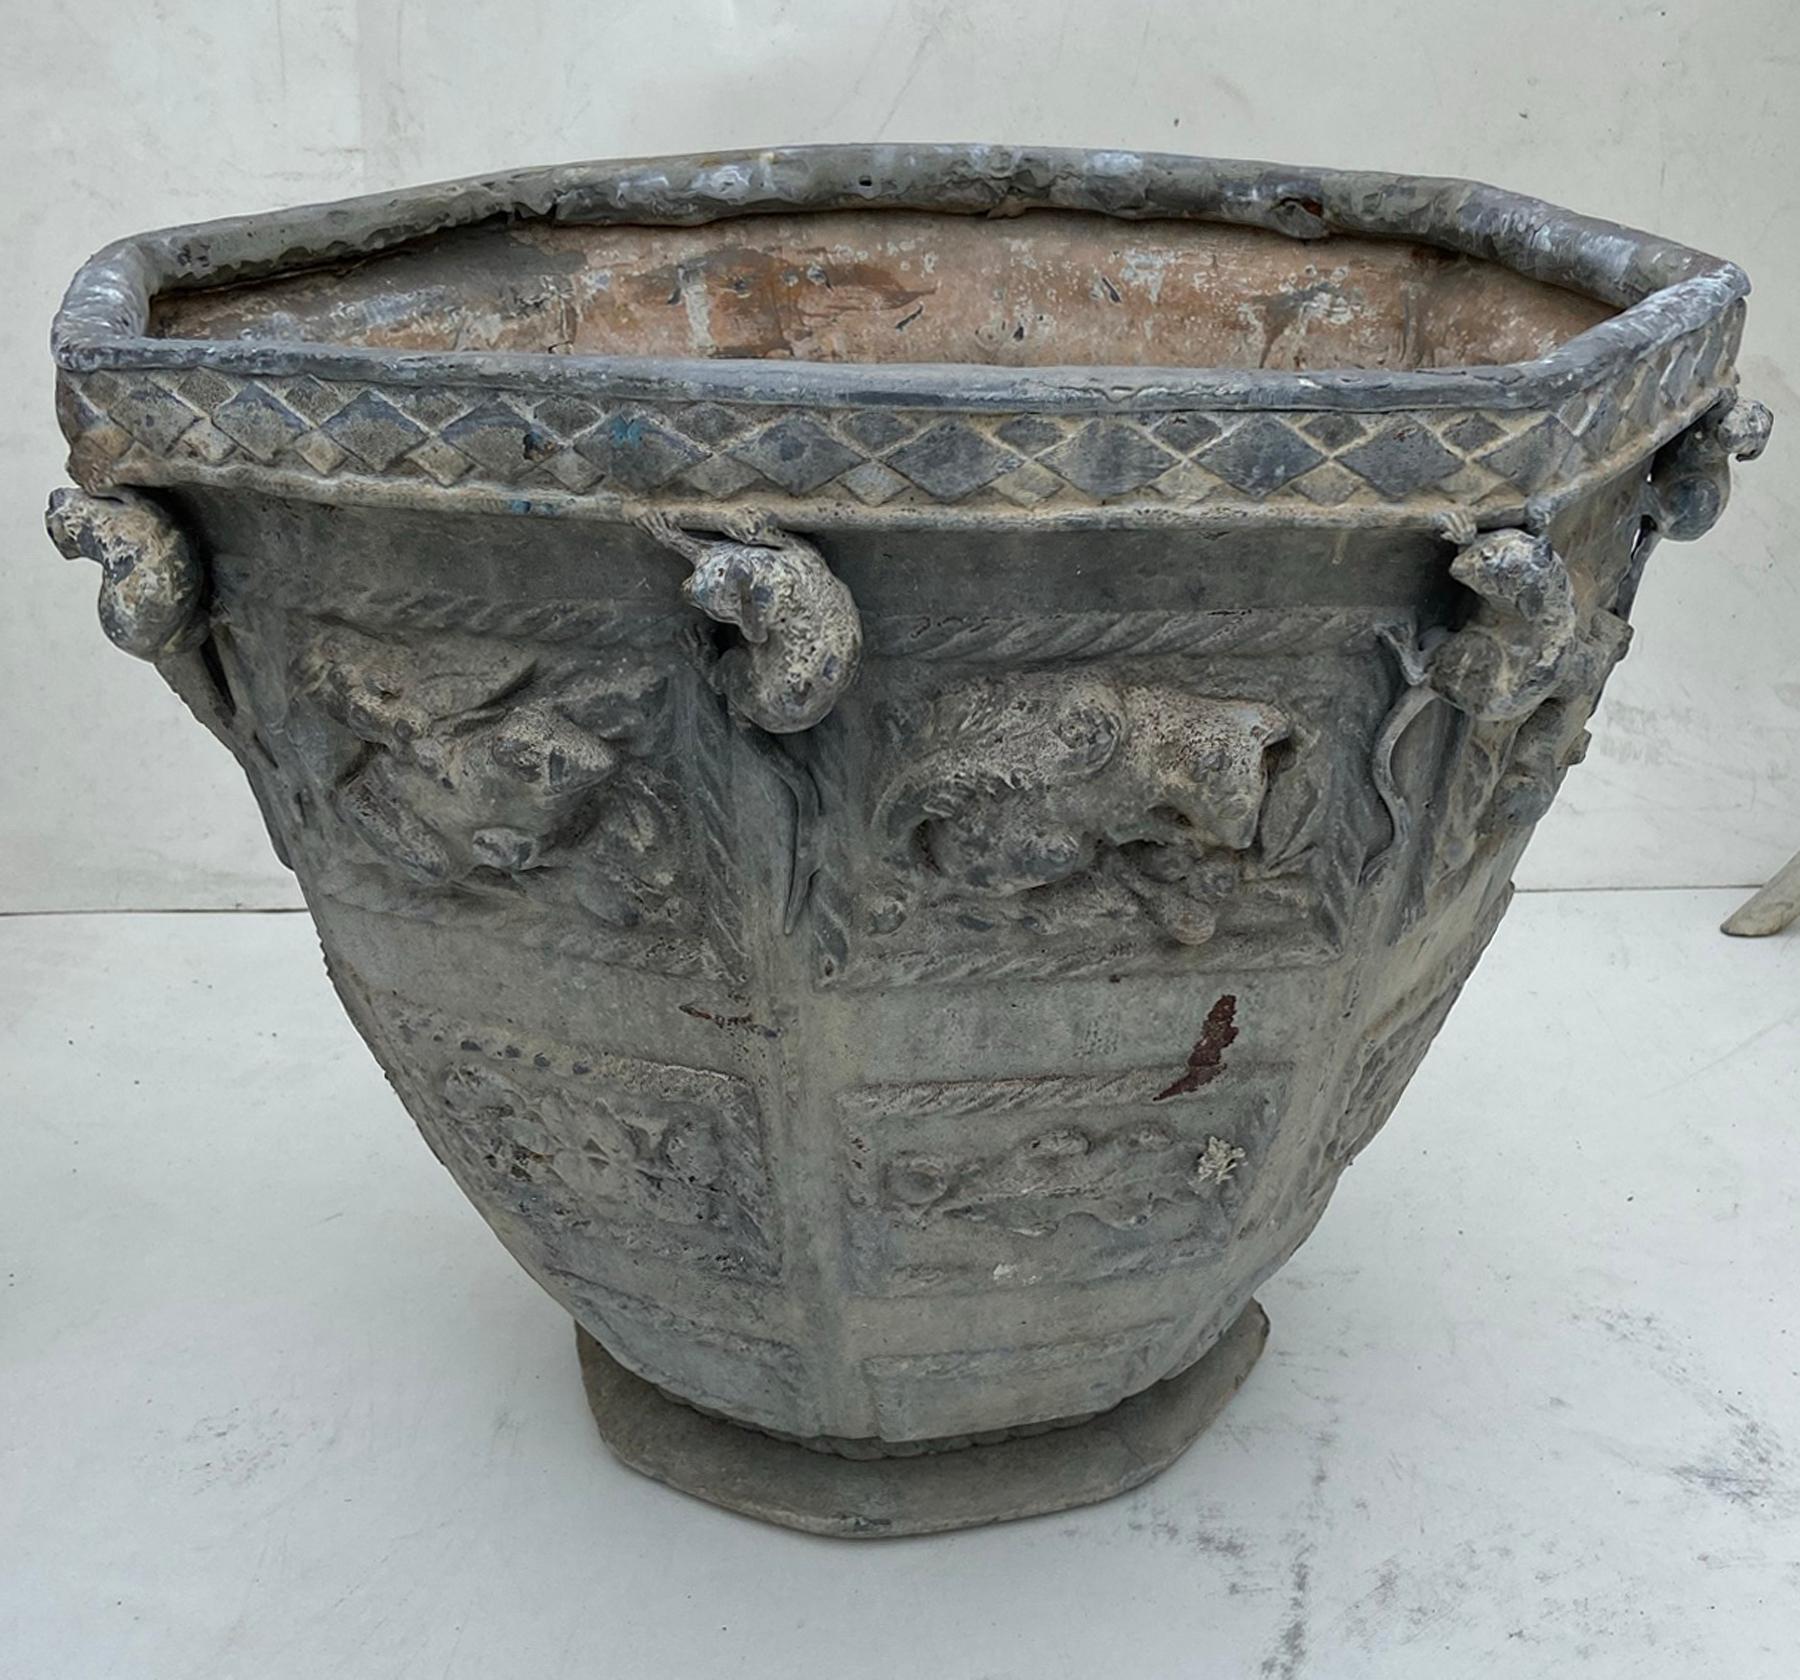 Extremely rare pair of “Bromsgrove Guild of Applied Arts” lead planters, circa 1910 Founded by Walter Gilbert. The guild received a Royal warrant in 1908. Among its many works are the gates at Buckingham palace. Cast in lead with 8 equal sides.